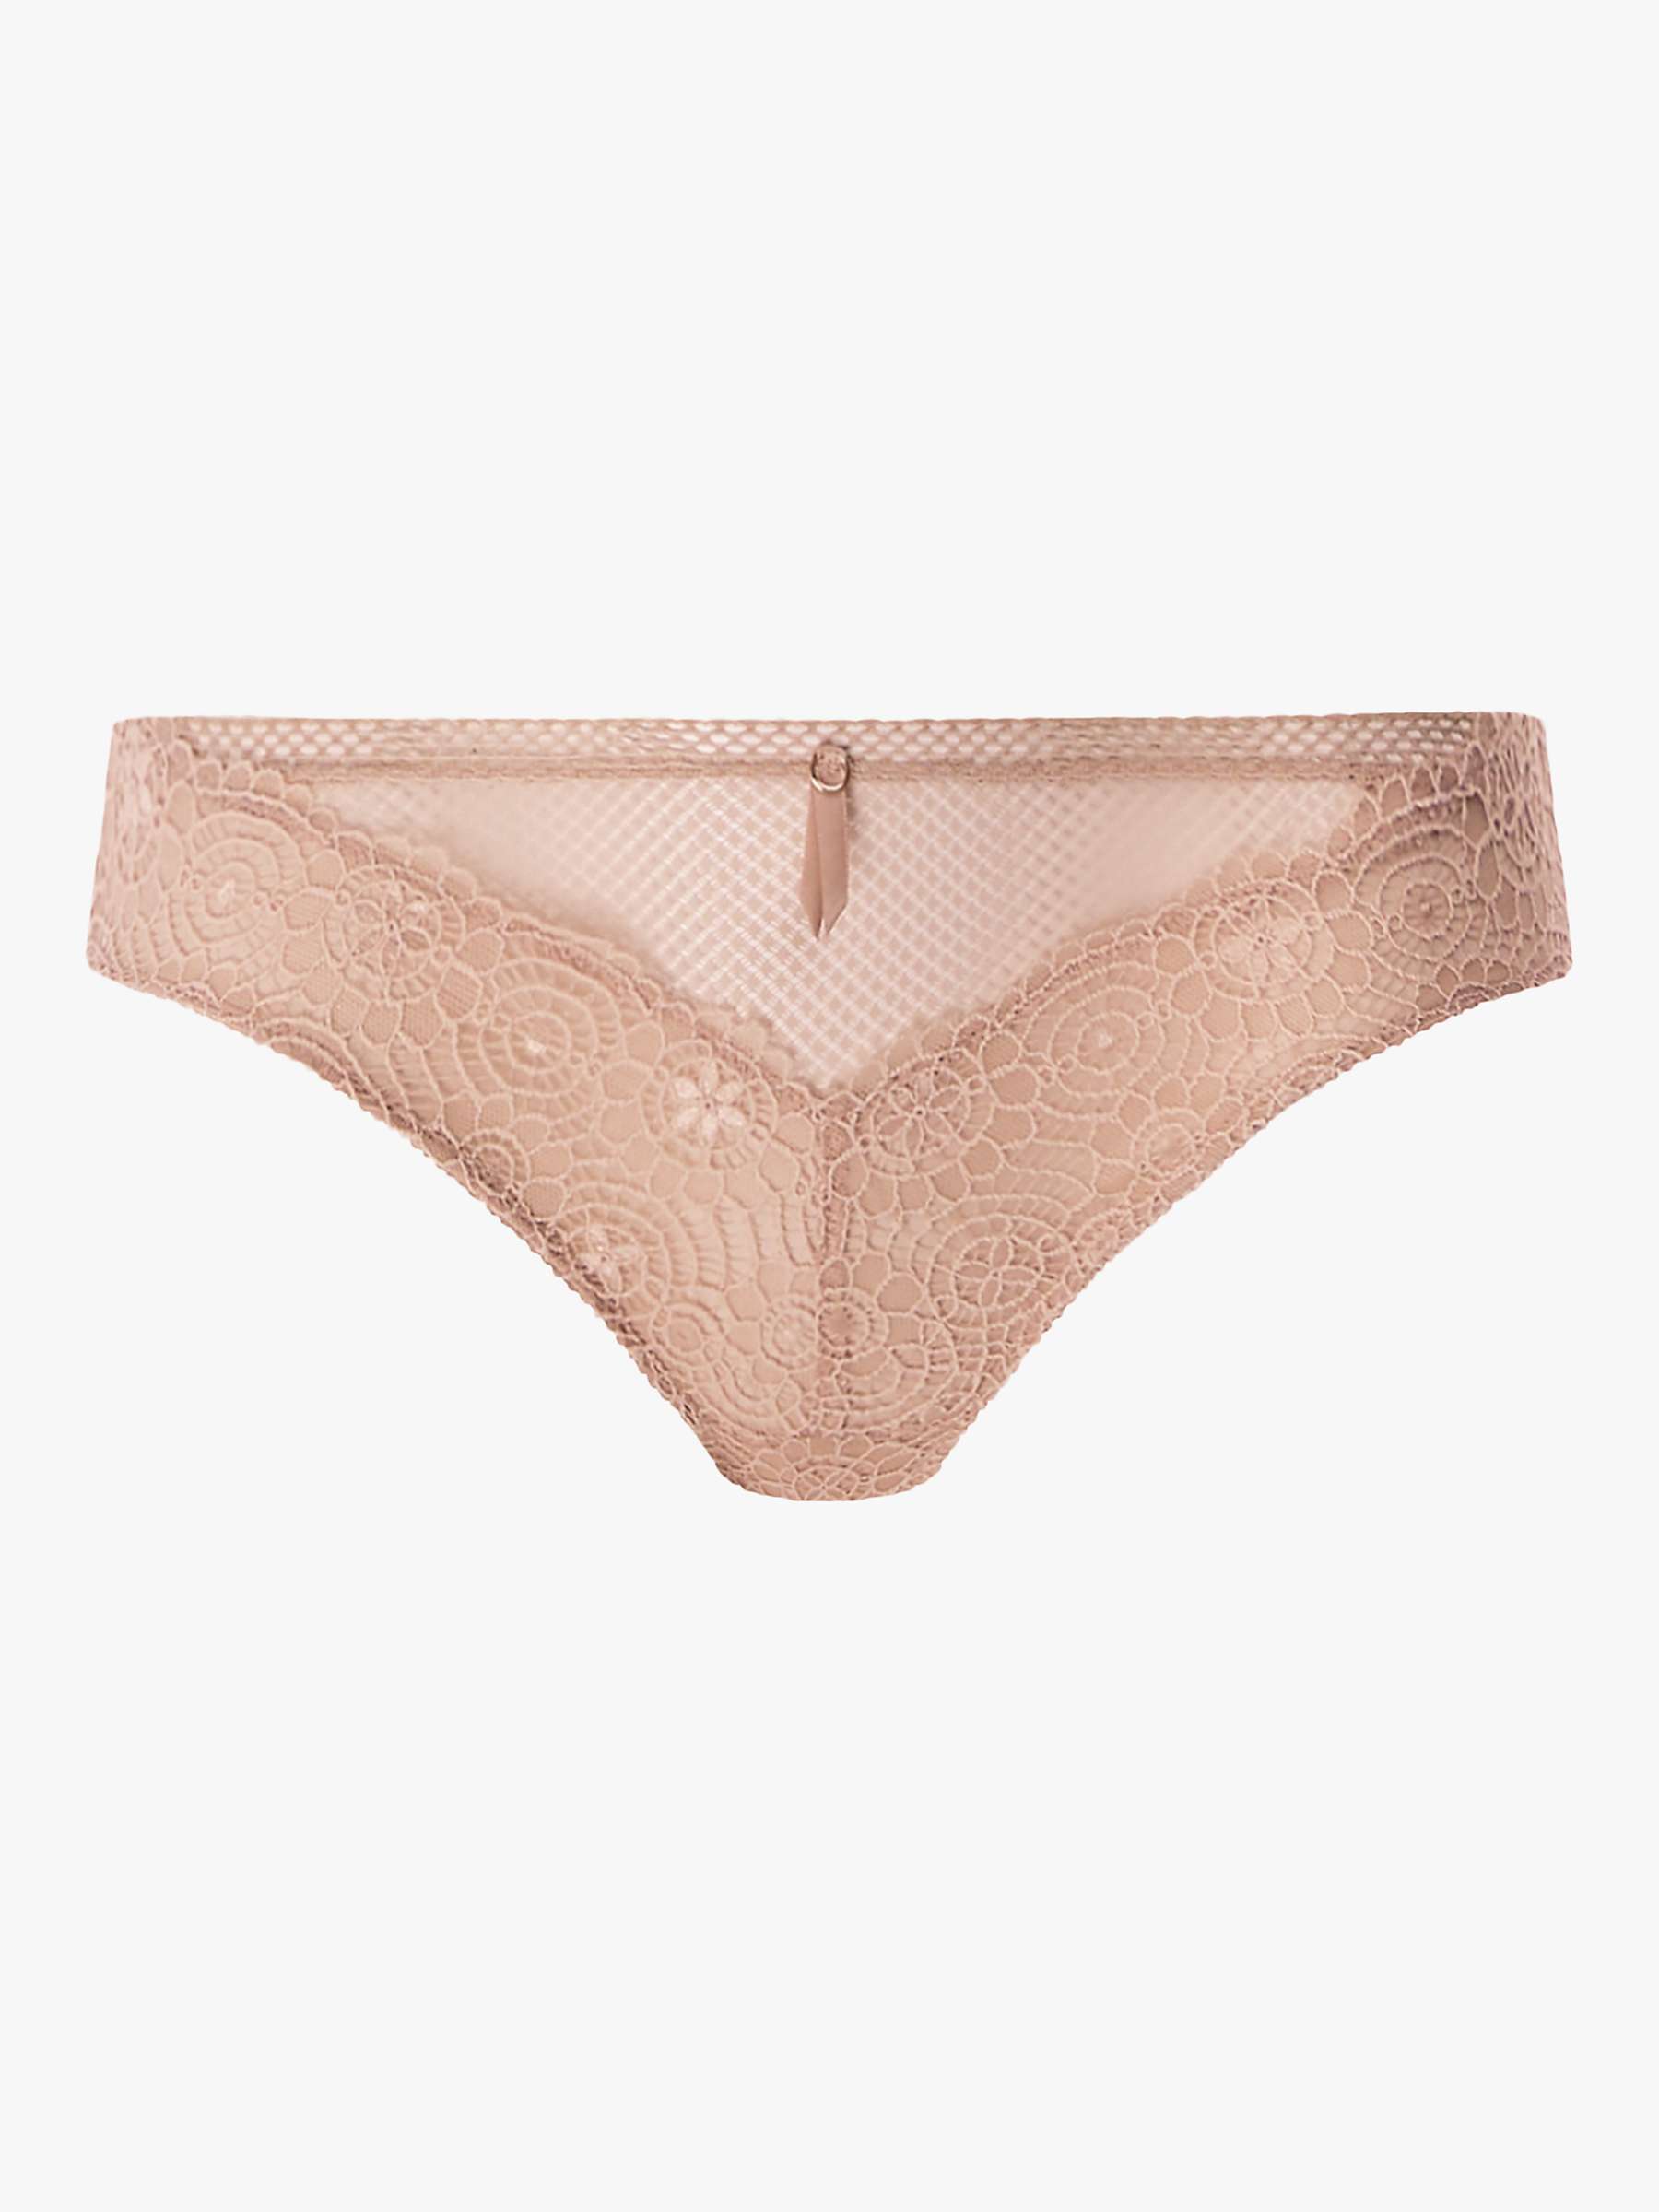 Buy Freya Expression Knickers, Natural Beige Online at johnlewis.com